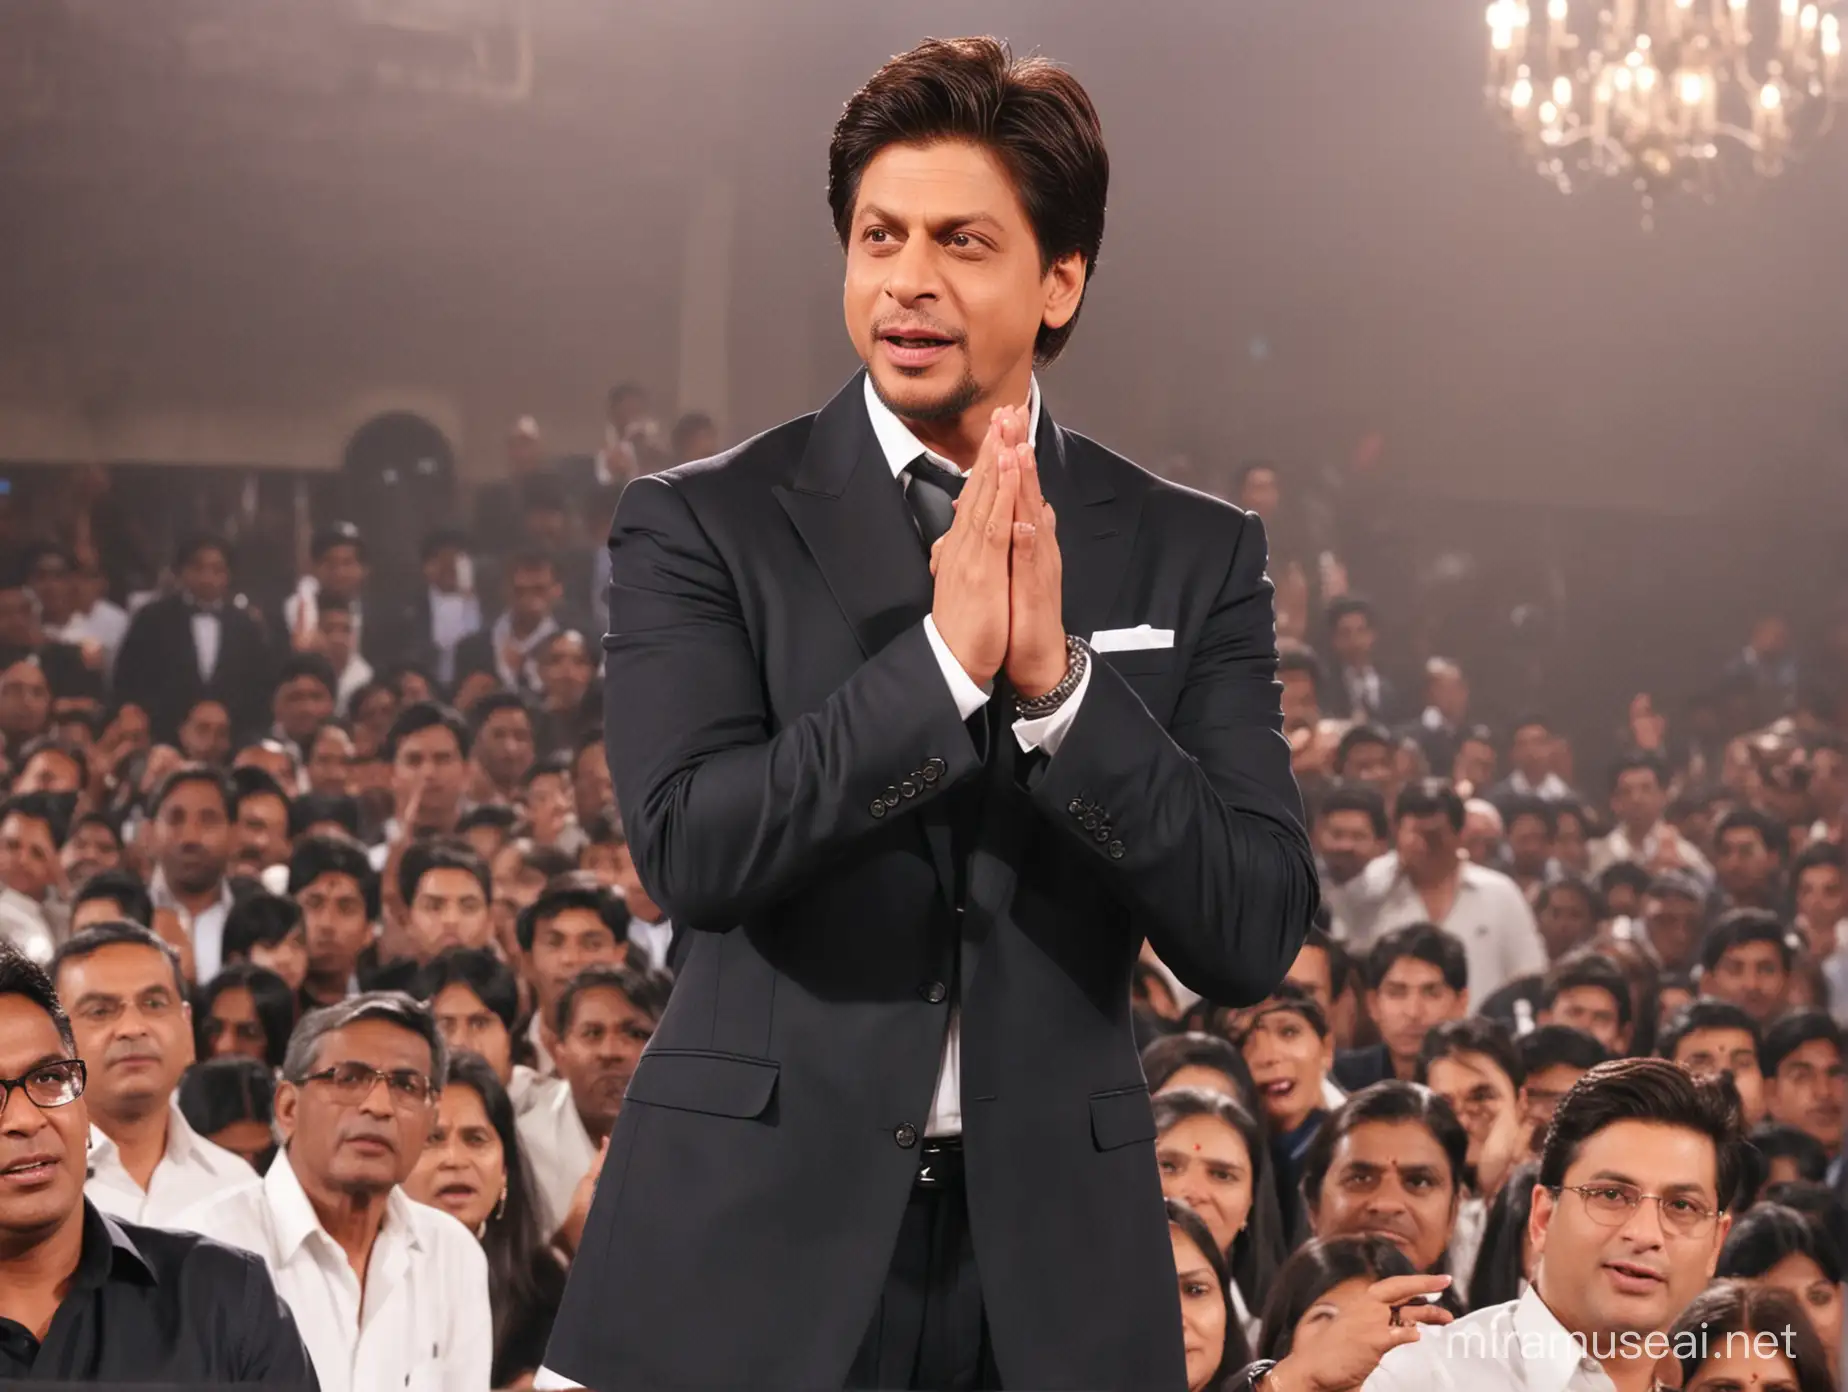 Shah Rukh Khan Inspiring Indian Audience with Formals